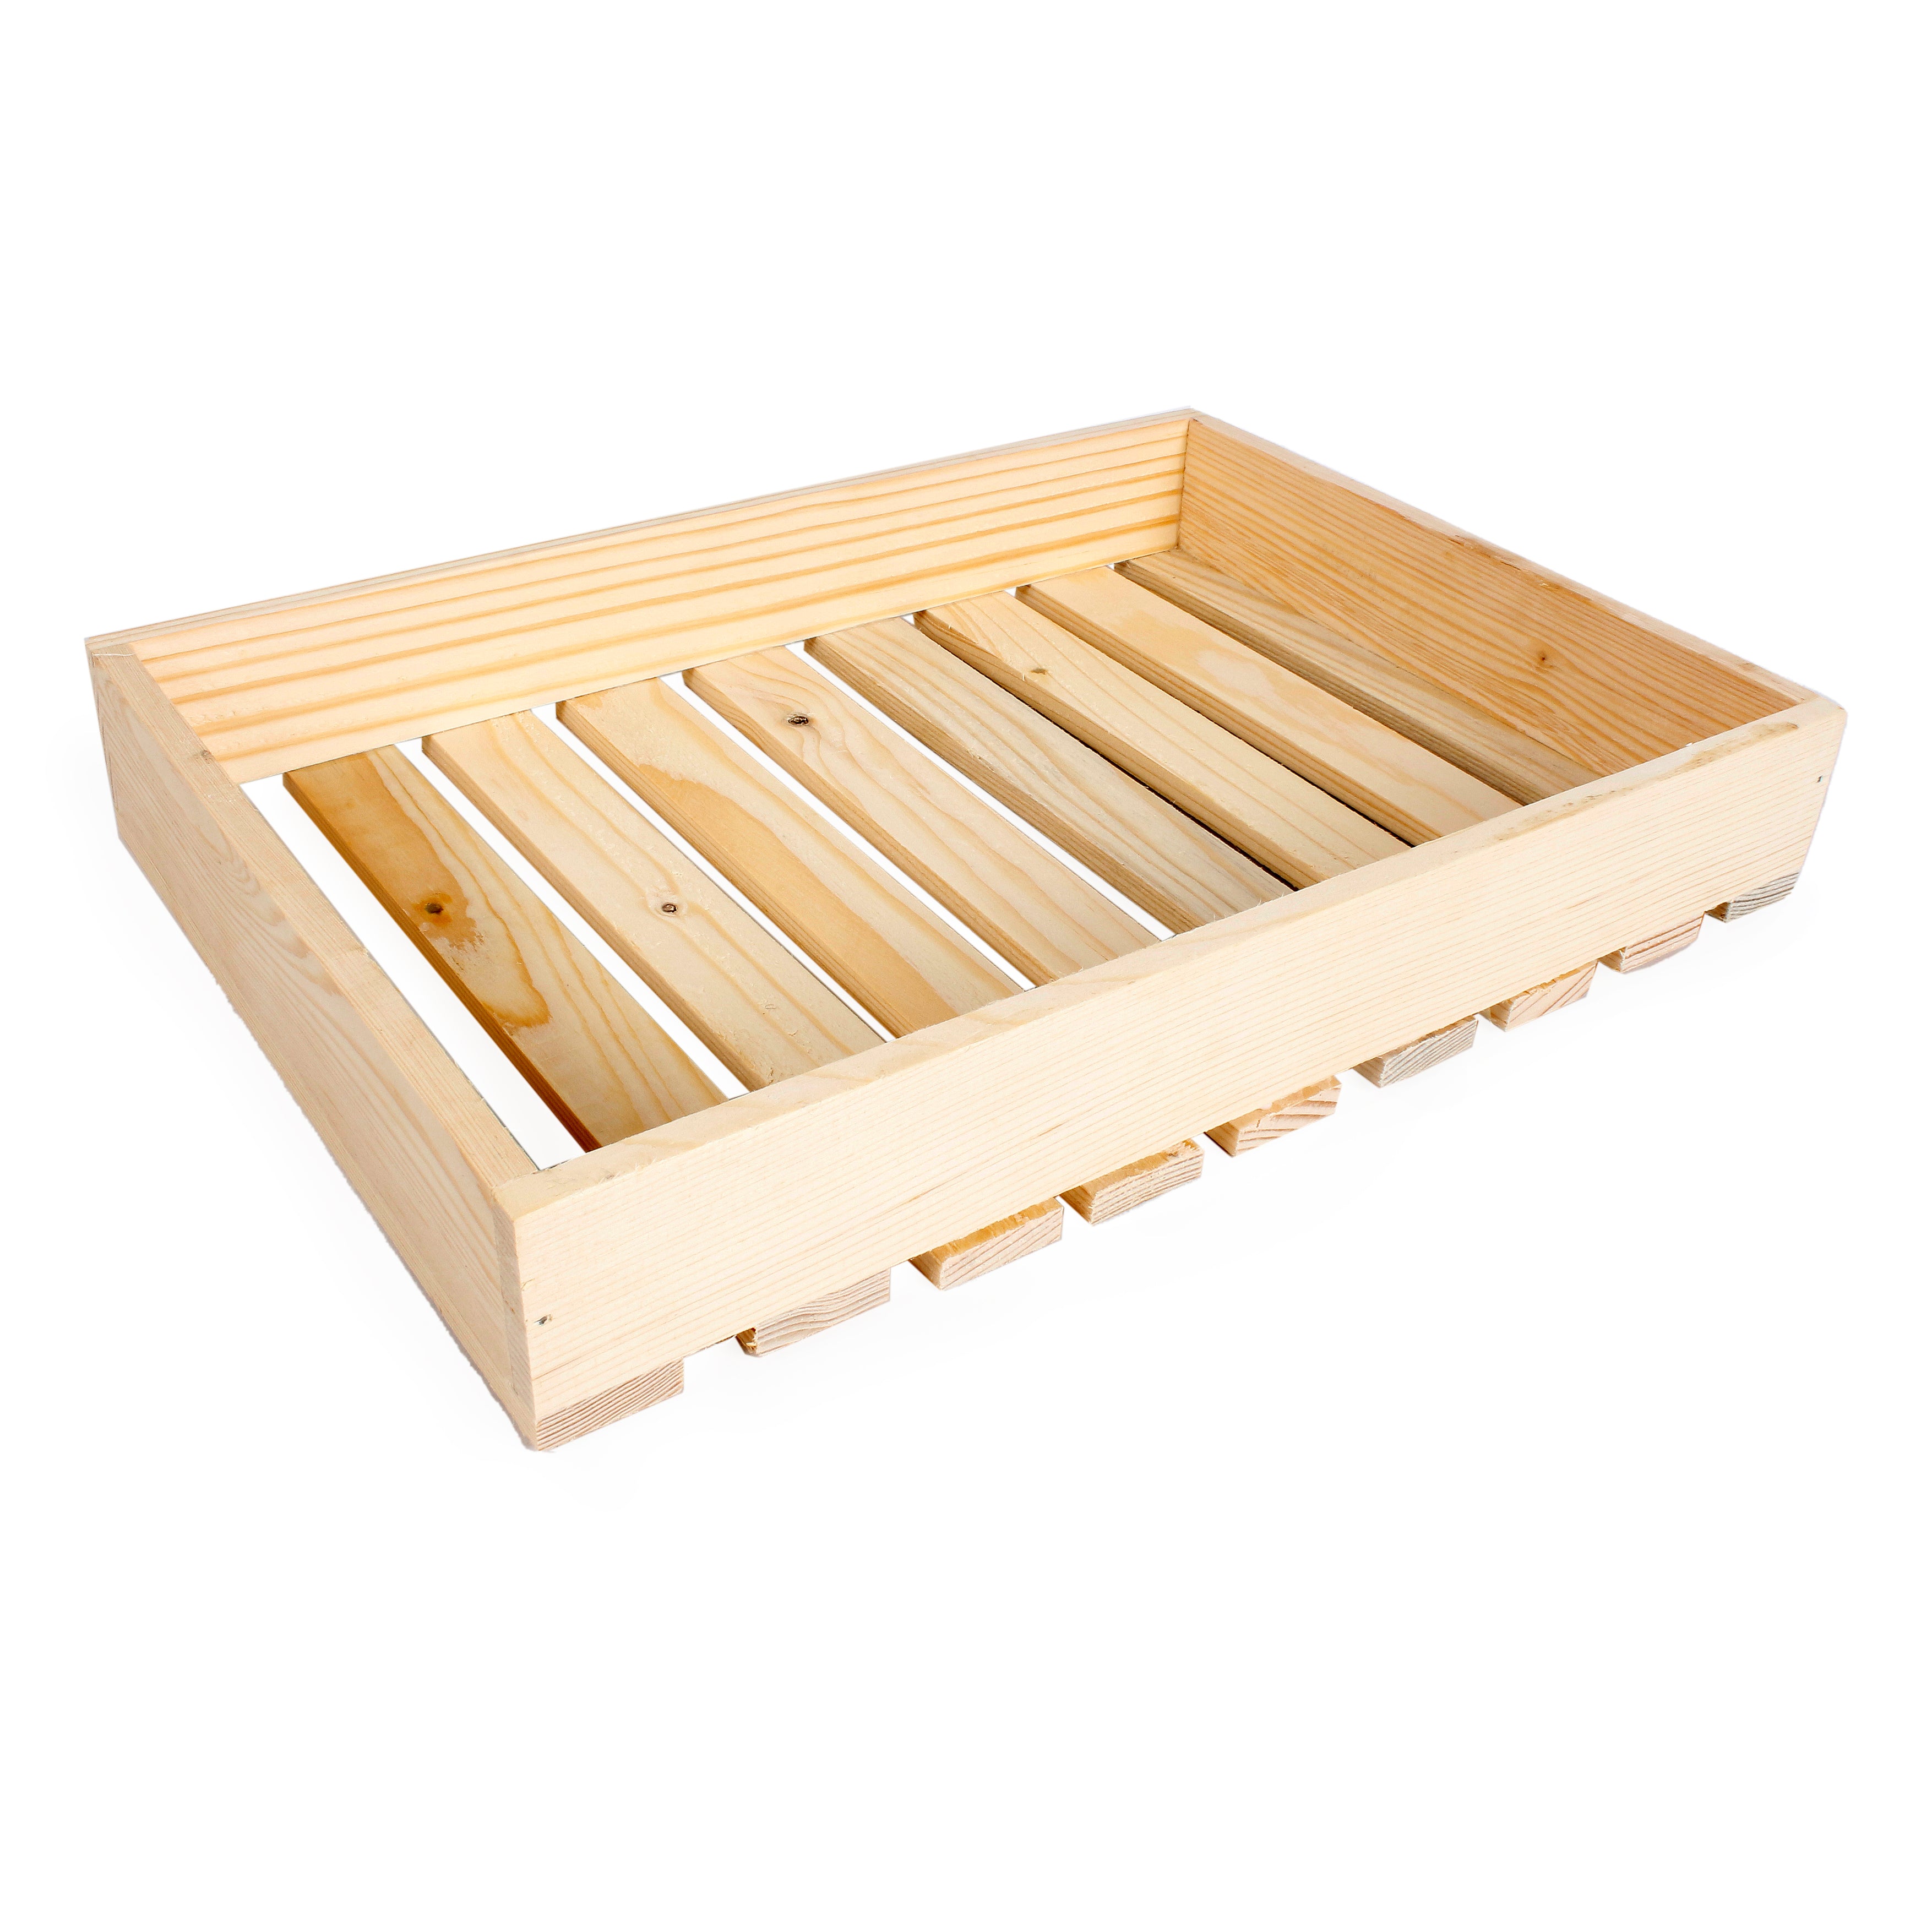 Wooden Multipurpose Slotted Serving Tray 10 X 14 X 2Inch 1Pc Ib